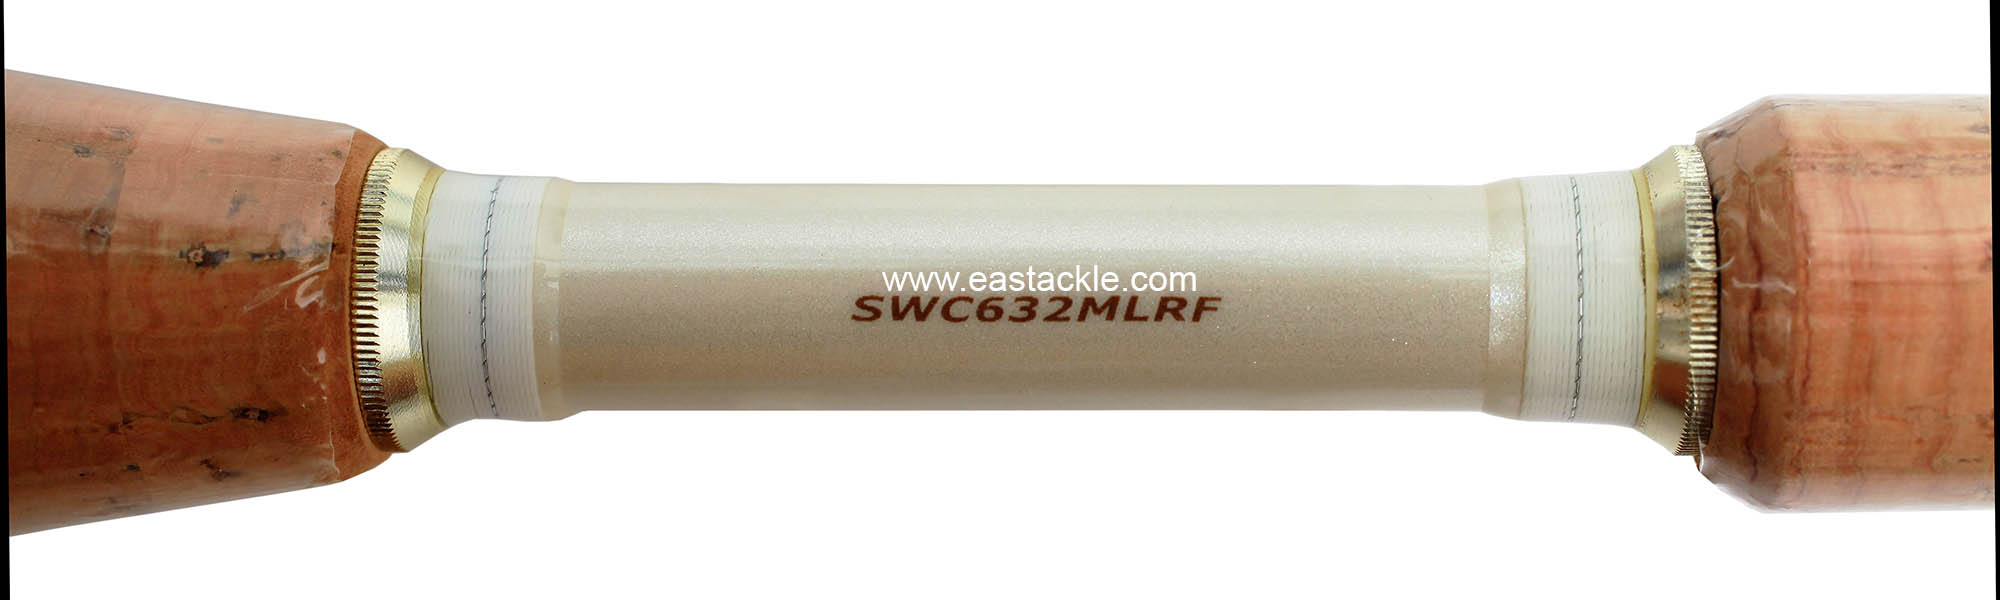 Rapala - Snow - SWC632MLRF - Bait Casting Rod - Blank Specifications (Under View) | Eastackle